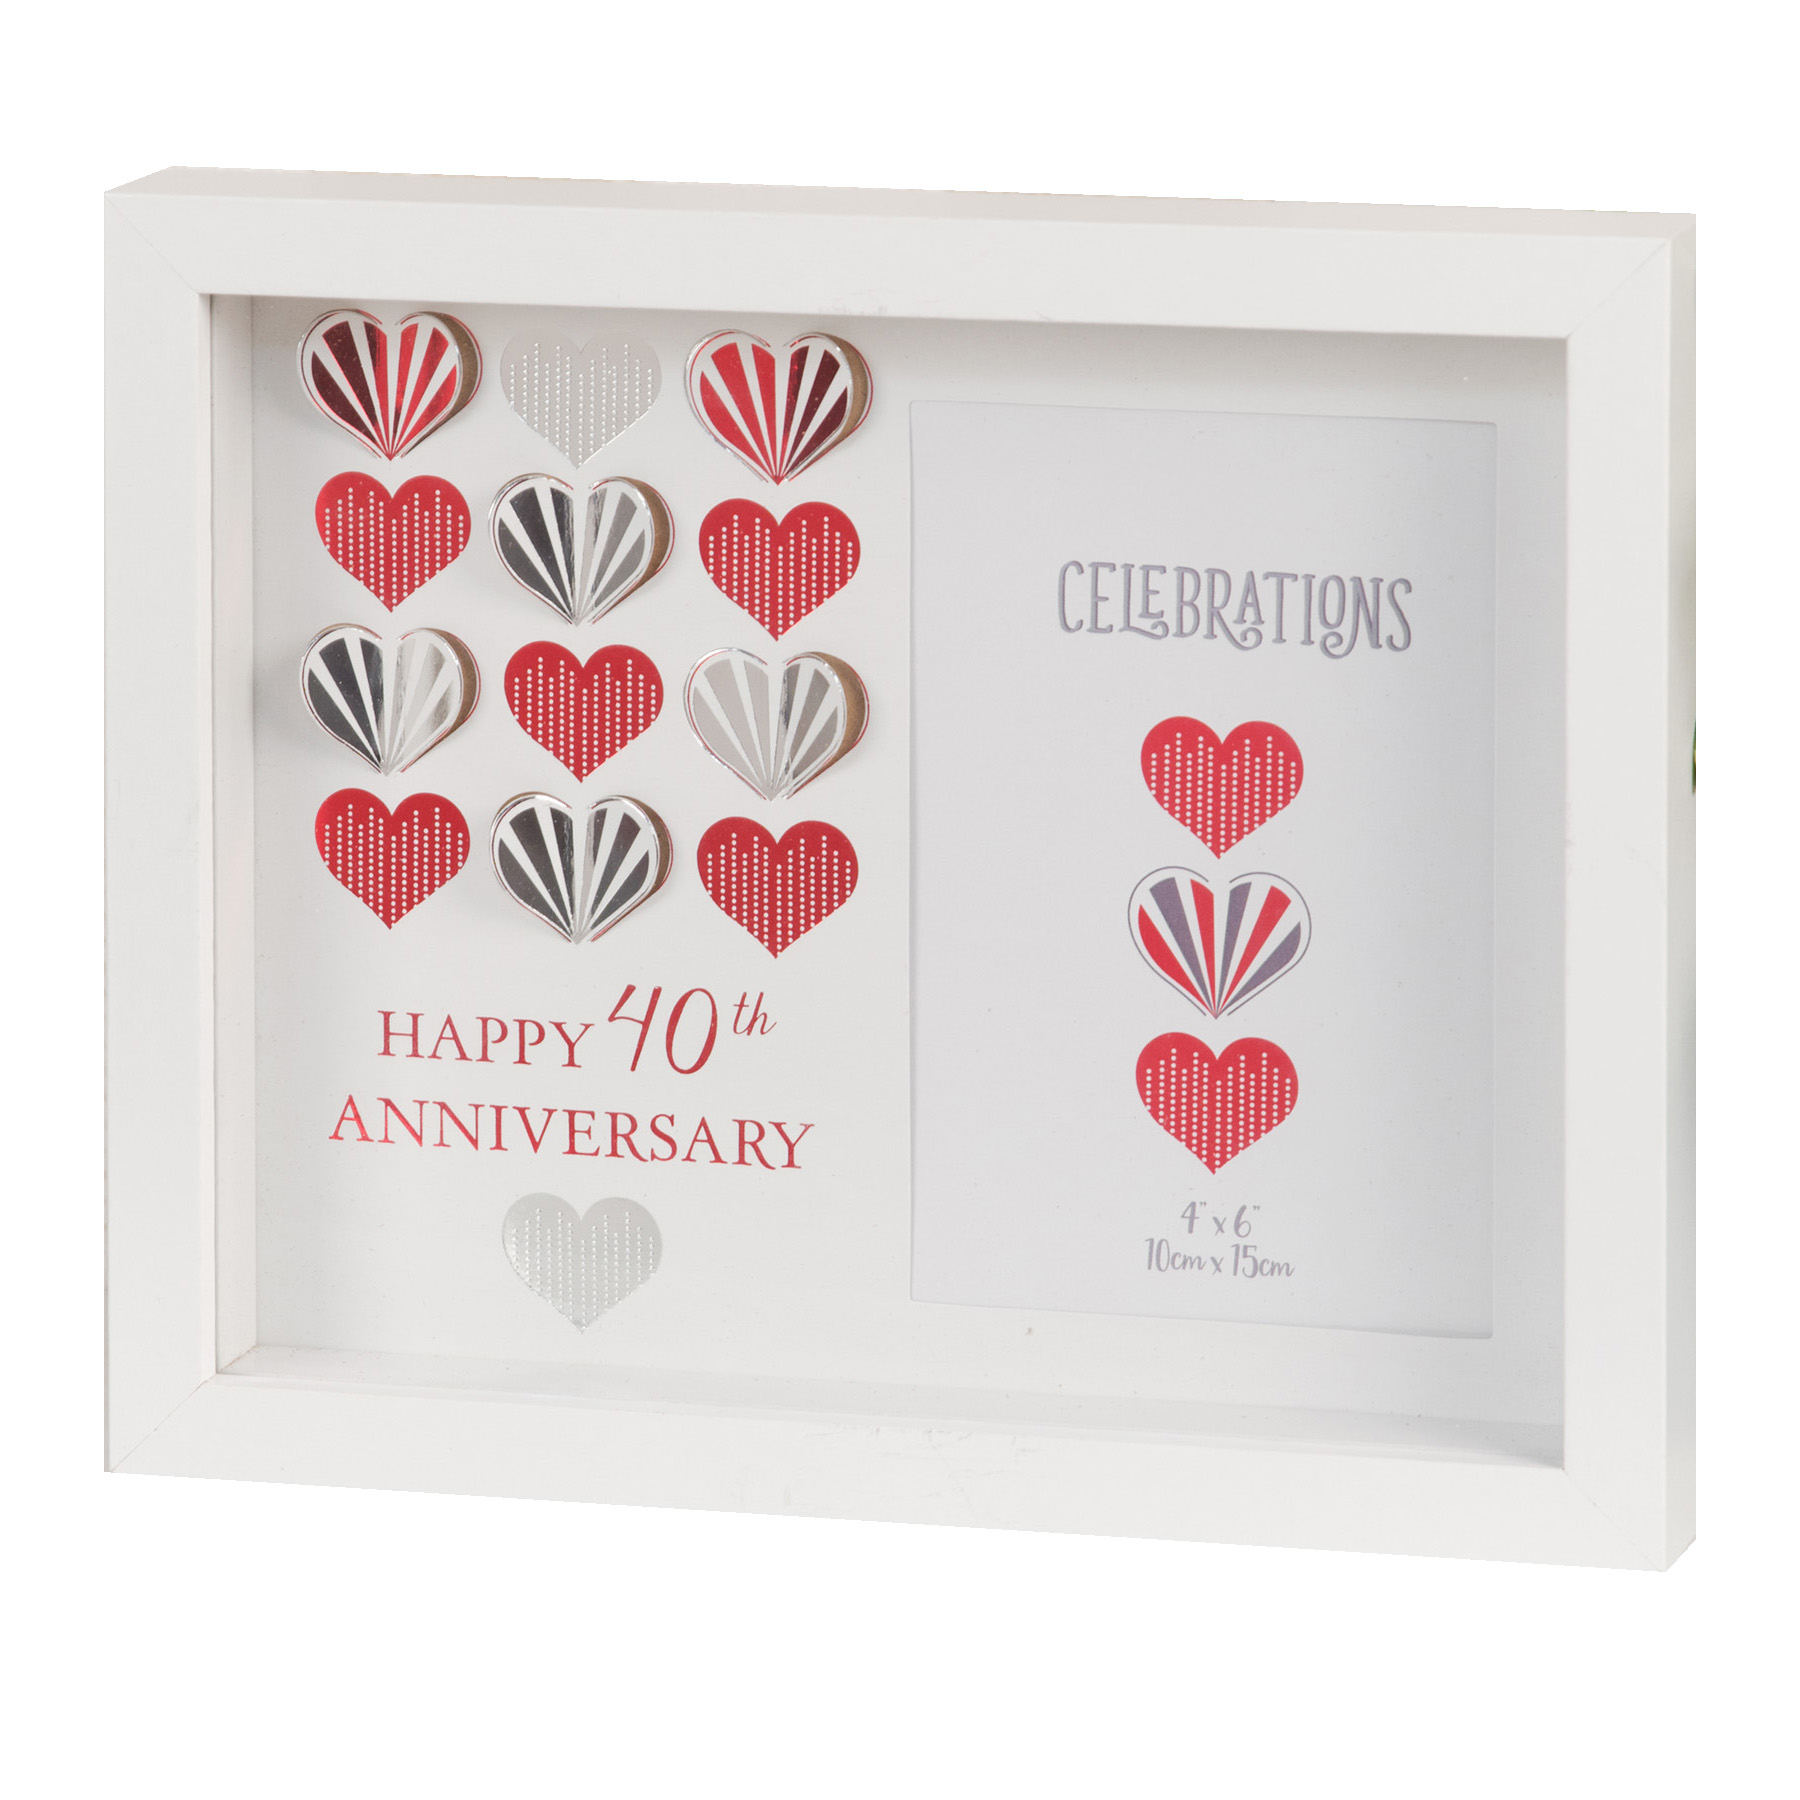 Celebrations White MDF Wall 4'x6' Frame Plaque - 40th Ruby Anniversary